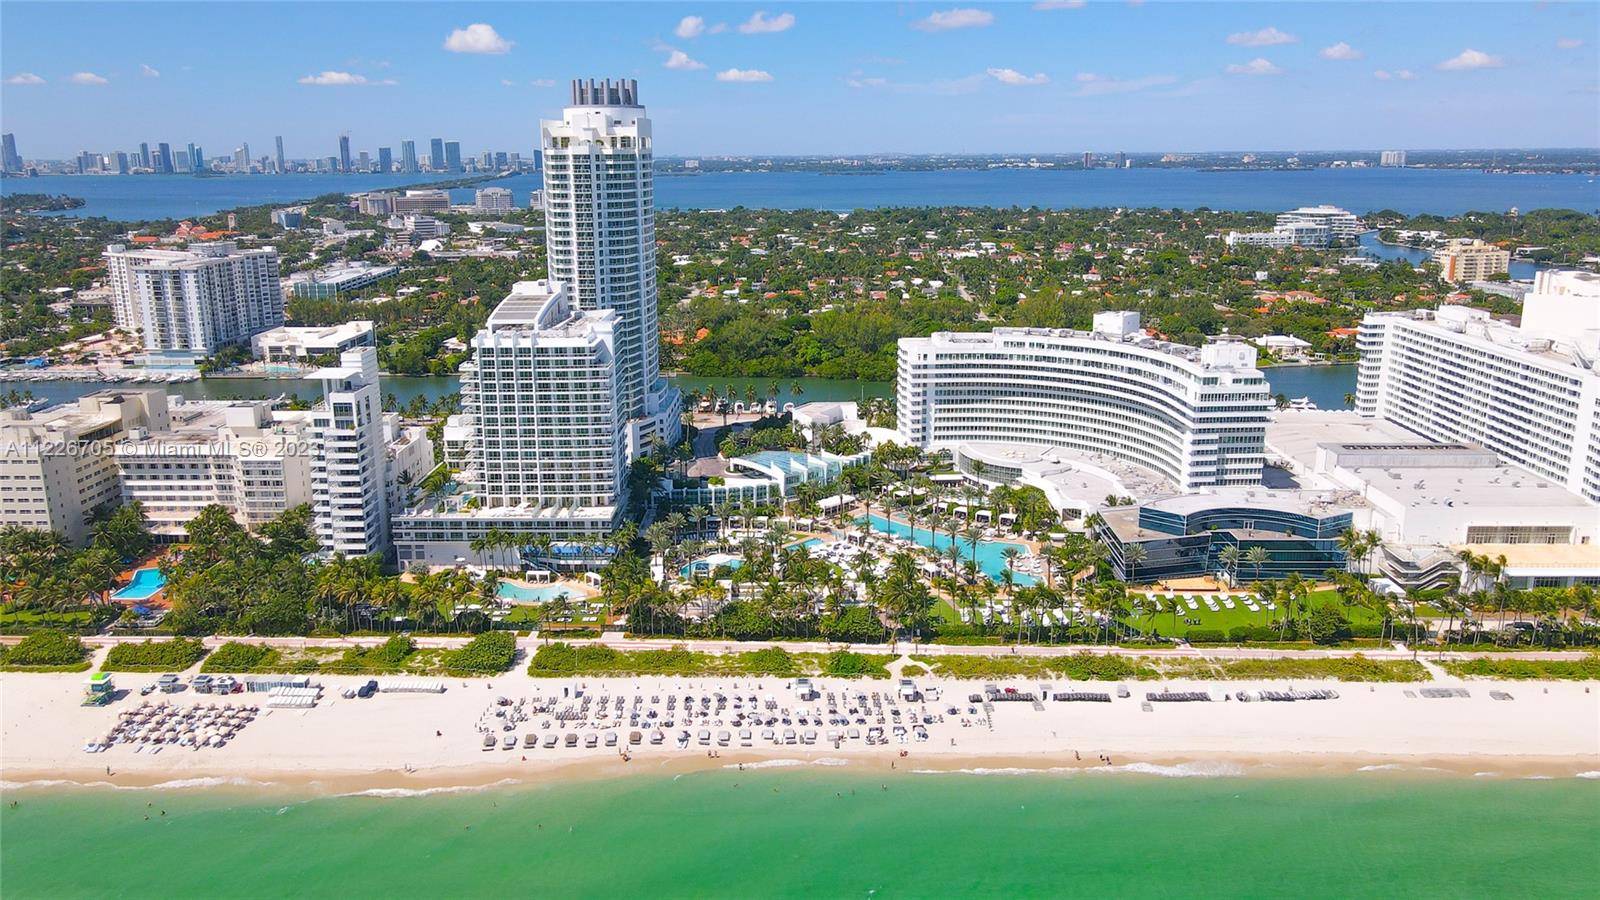 Beautiful 2BD/3BA w/views of the ocean & bay and 3 large balconies at Fontainebleau II. Enjoy full service, vacation-style living in a furnished turnkey unit with 2 king beds, 2 sleeper sofas & more. Enroll in hotel rental program & receive income while away! The Fontainebleau Resort offers luxury amenities on 22 oceanfront acres including award-winning restaurants, LIV night club, Lapis spa & state-of-the-art fitness center. Maintenance includes: AC, local calls, electricity, valet + daily free breakfast in the owner’s lounge.
Click the virtual tour link to see video of property & contact me directly for more info.